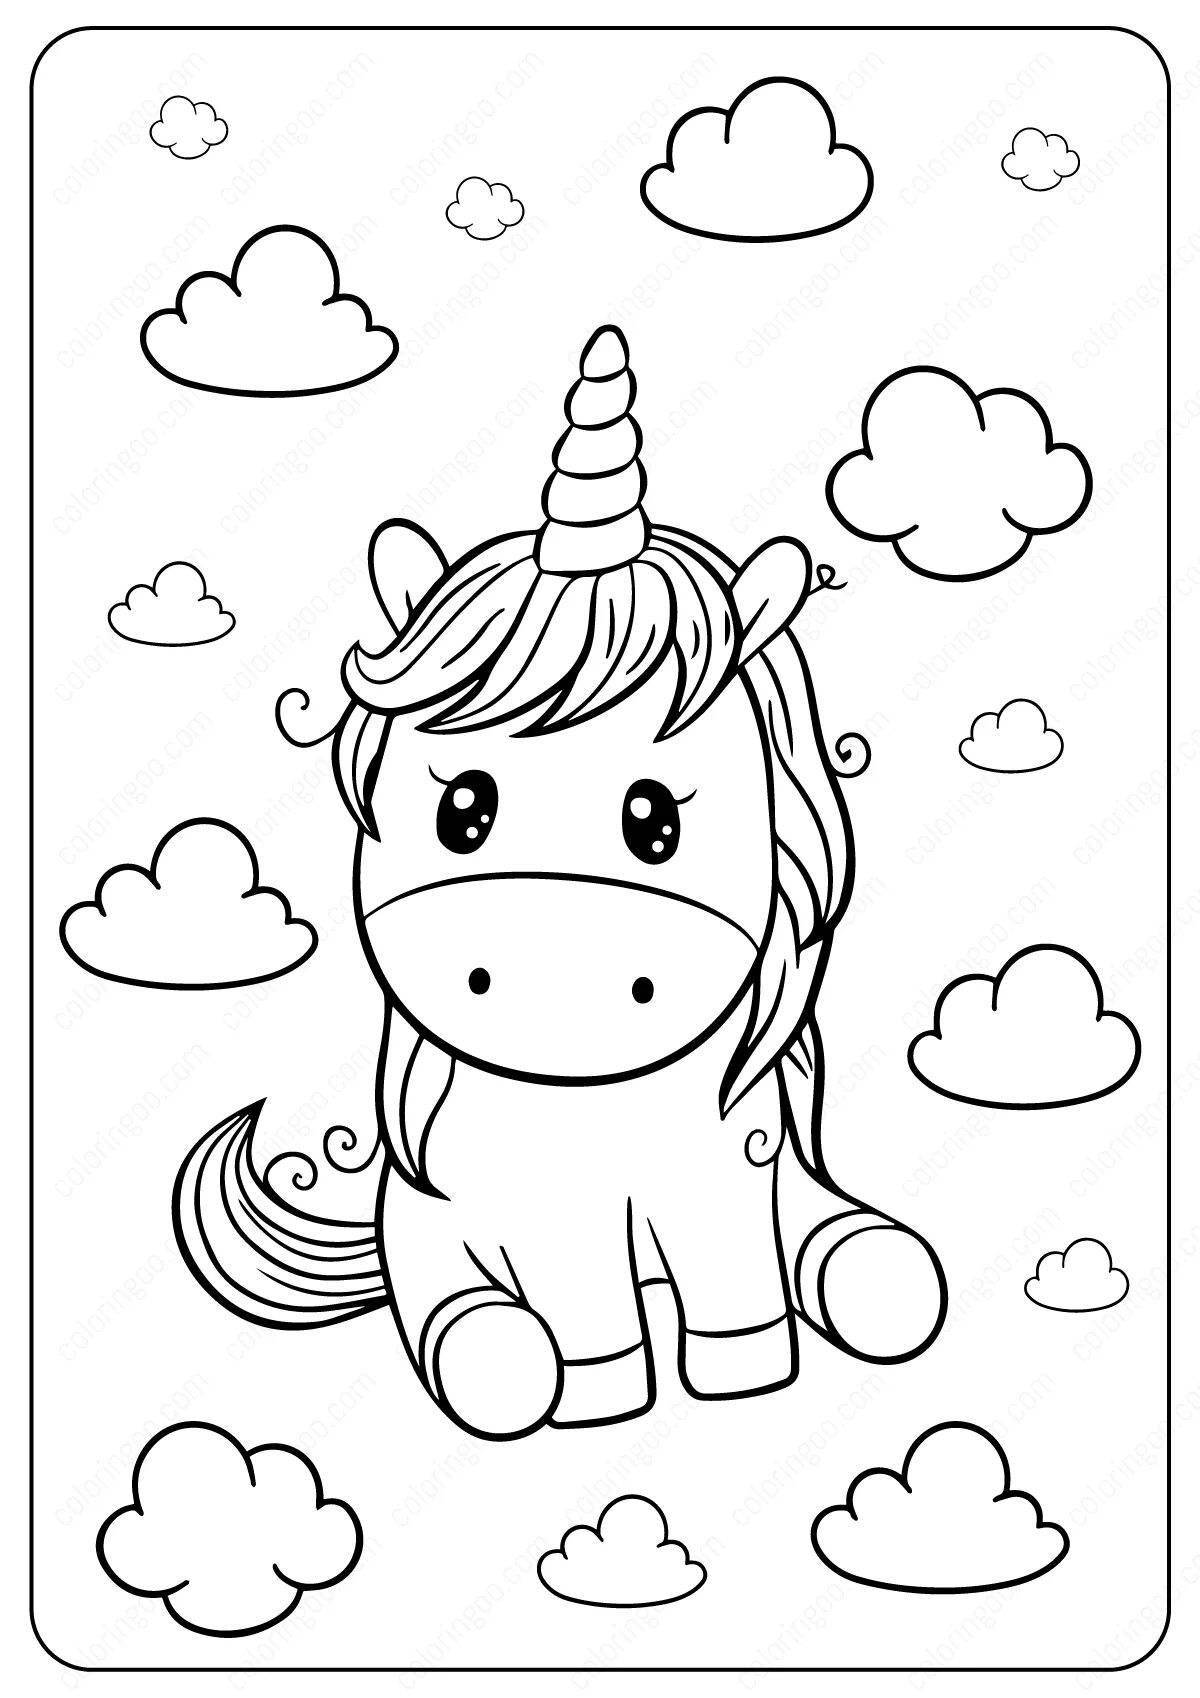 Painting coloring drawing of a unicorn